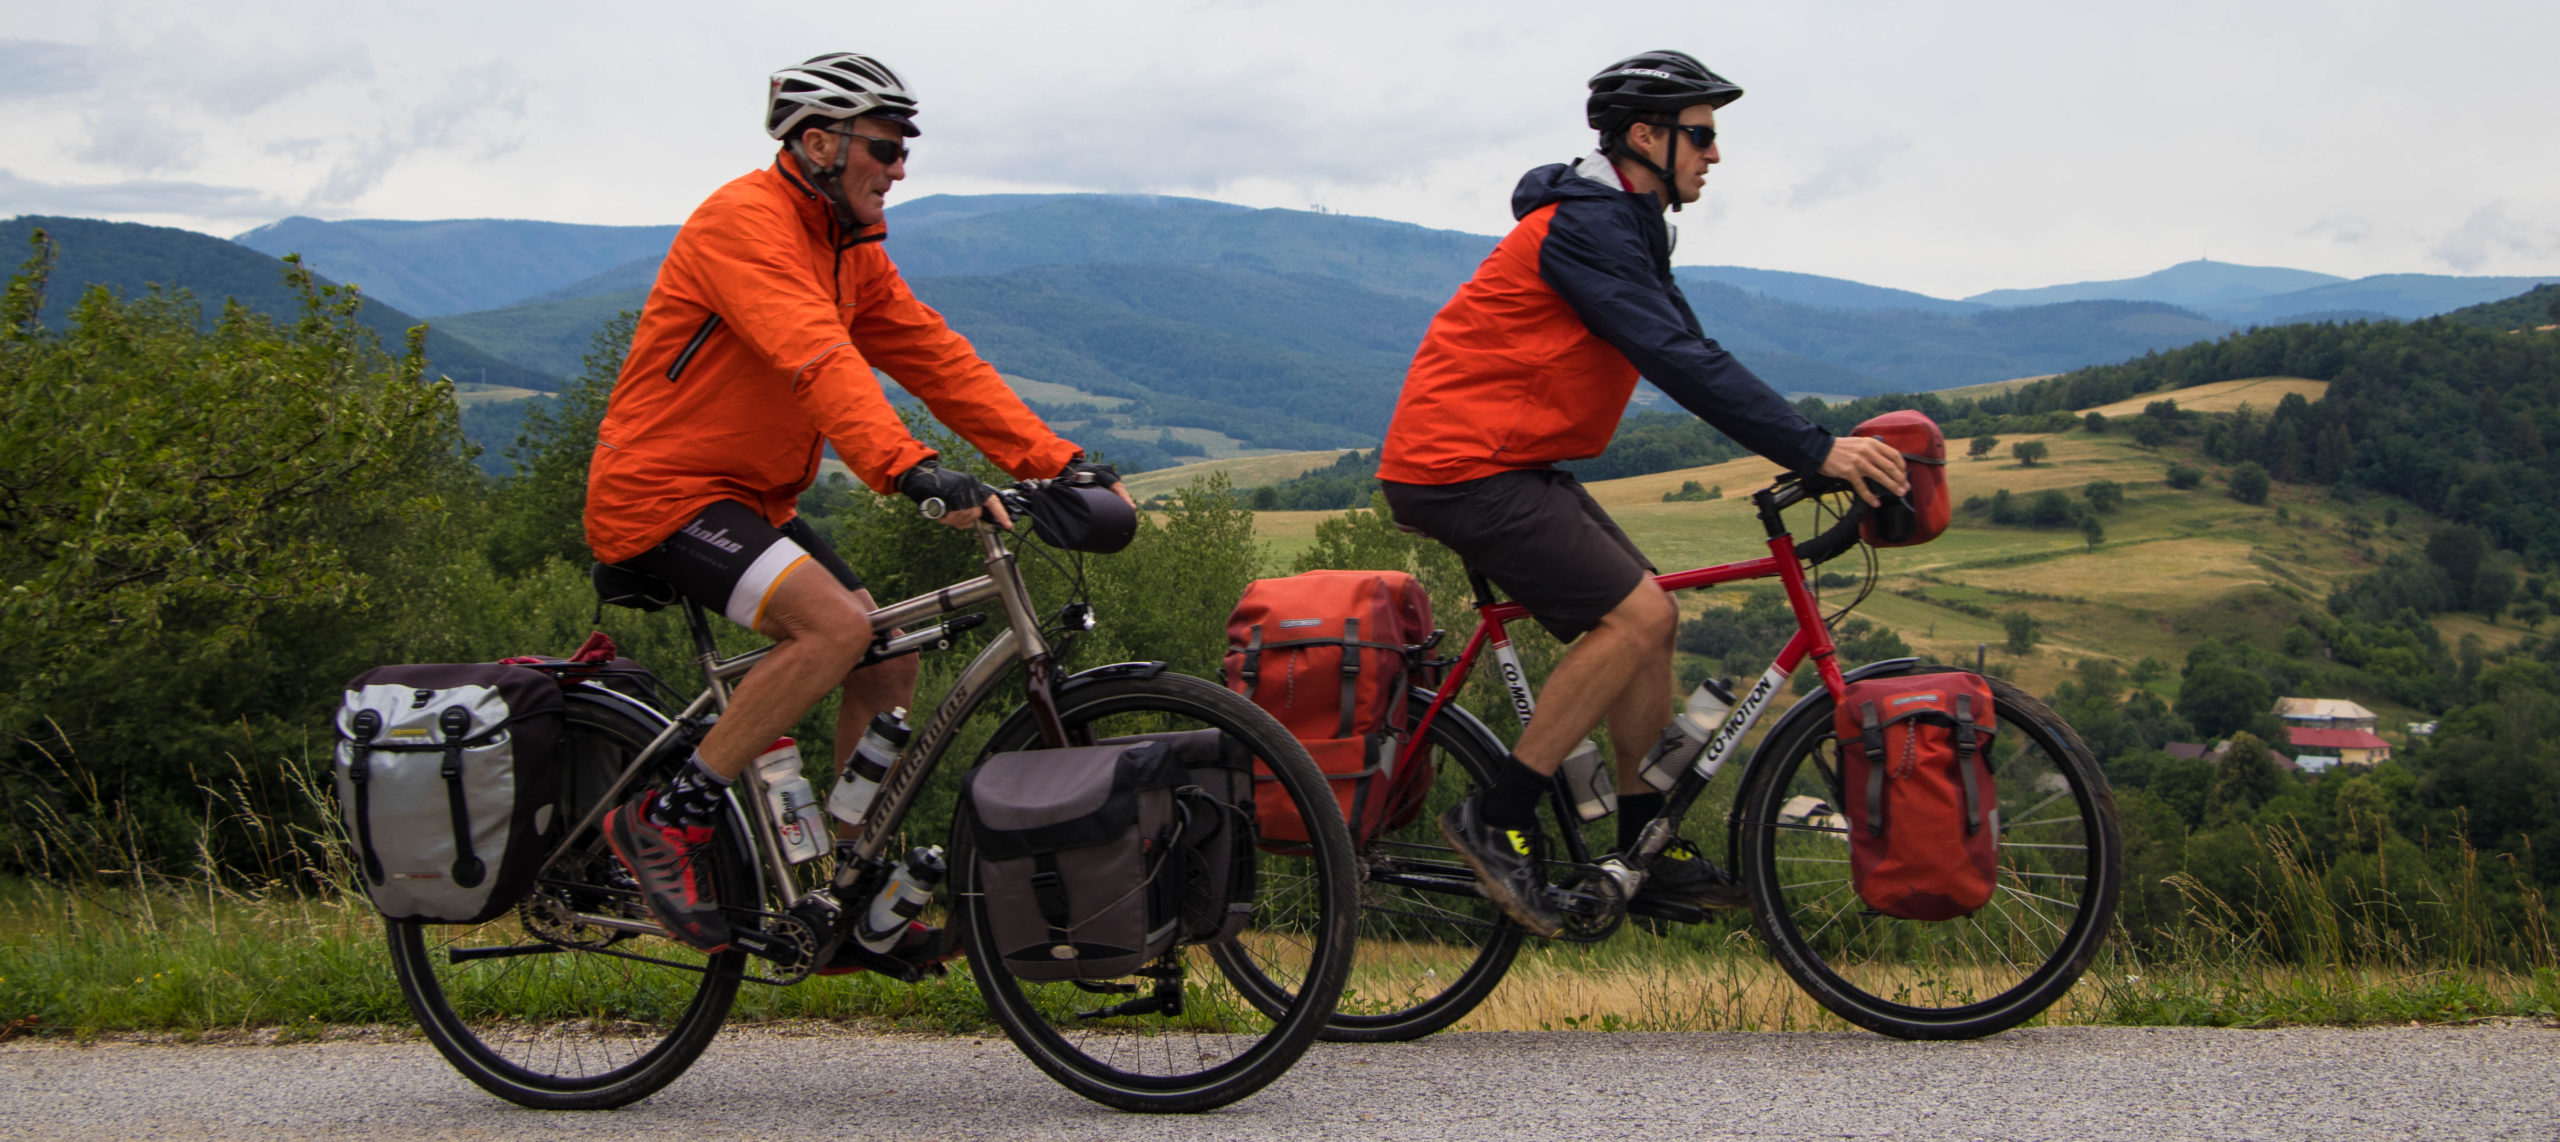 VIP bike tours with the Bicycle Touring Pro Bicycle Touring Pro